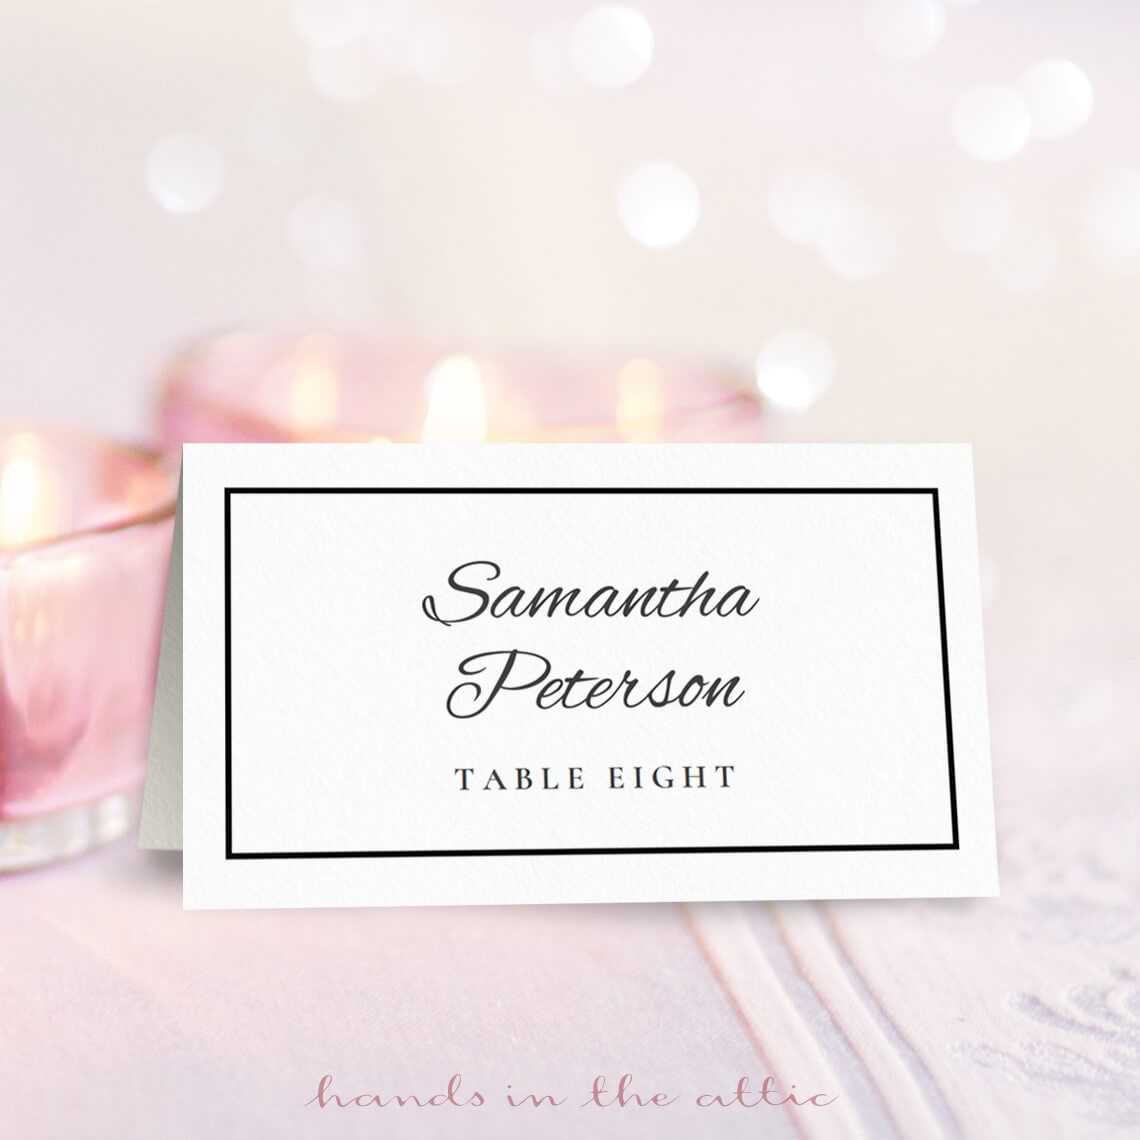 013 Free Place Card Template Templates Word Excellent Ideas Intended For Place Card Template 6 Per Sheet